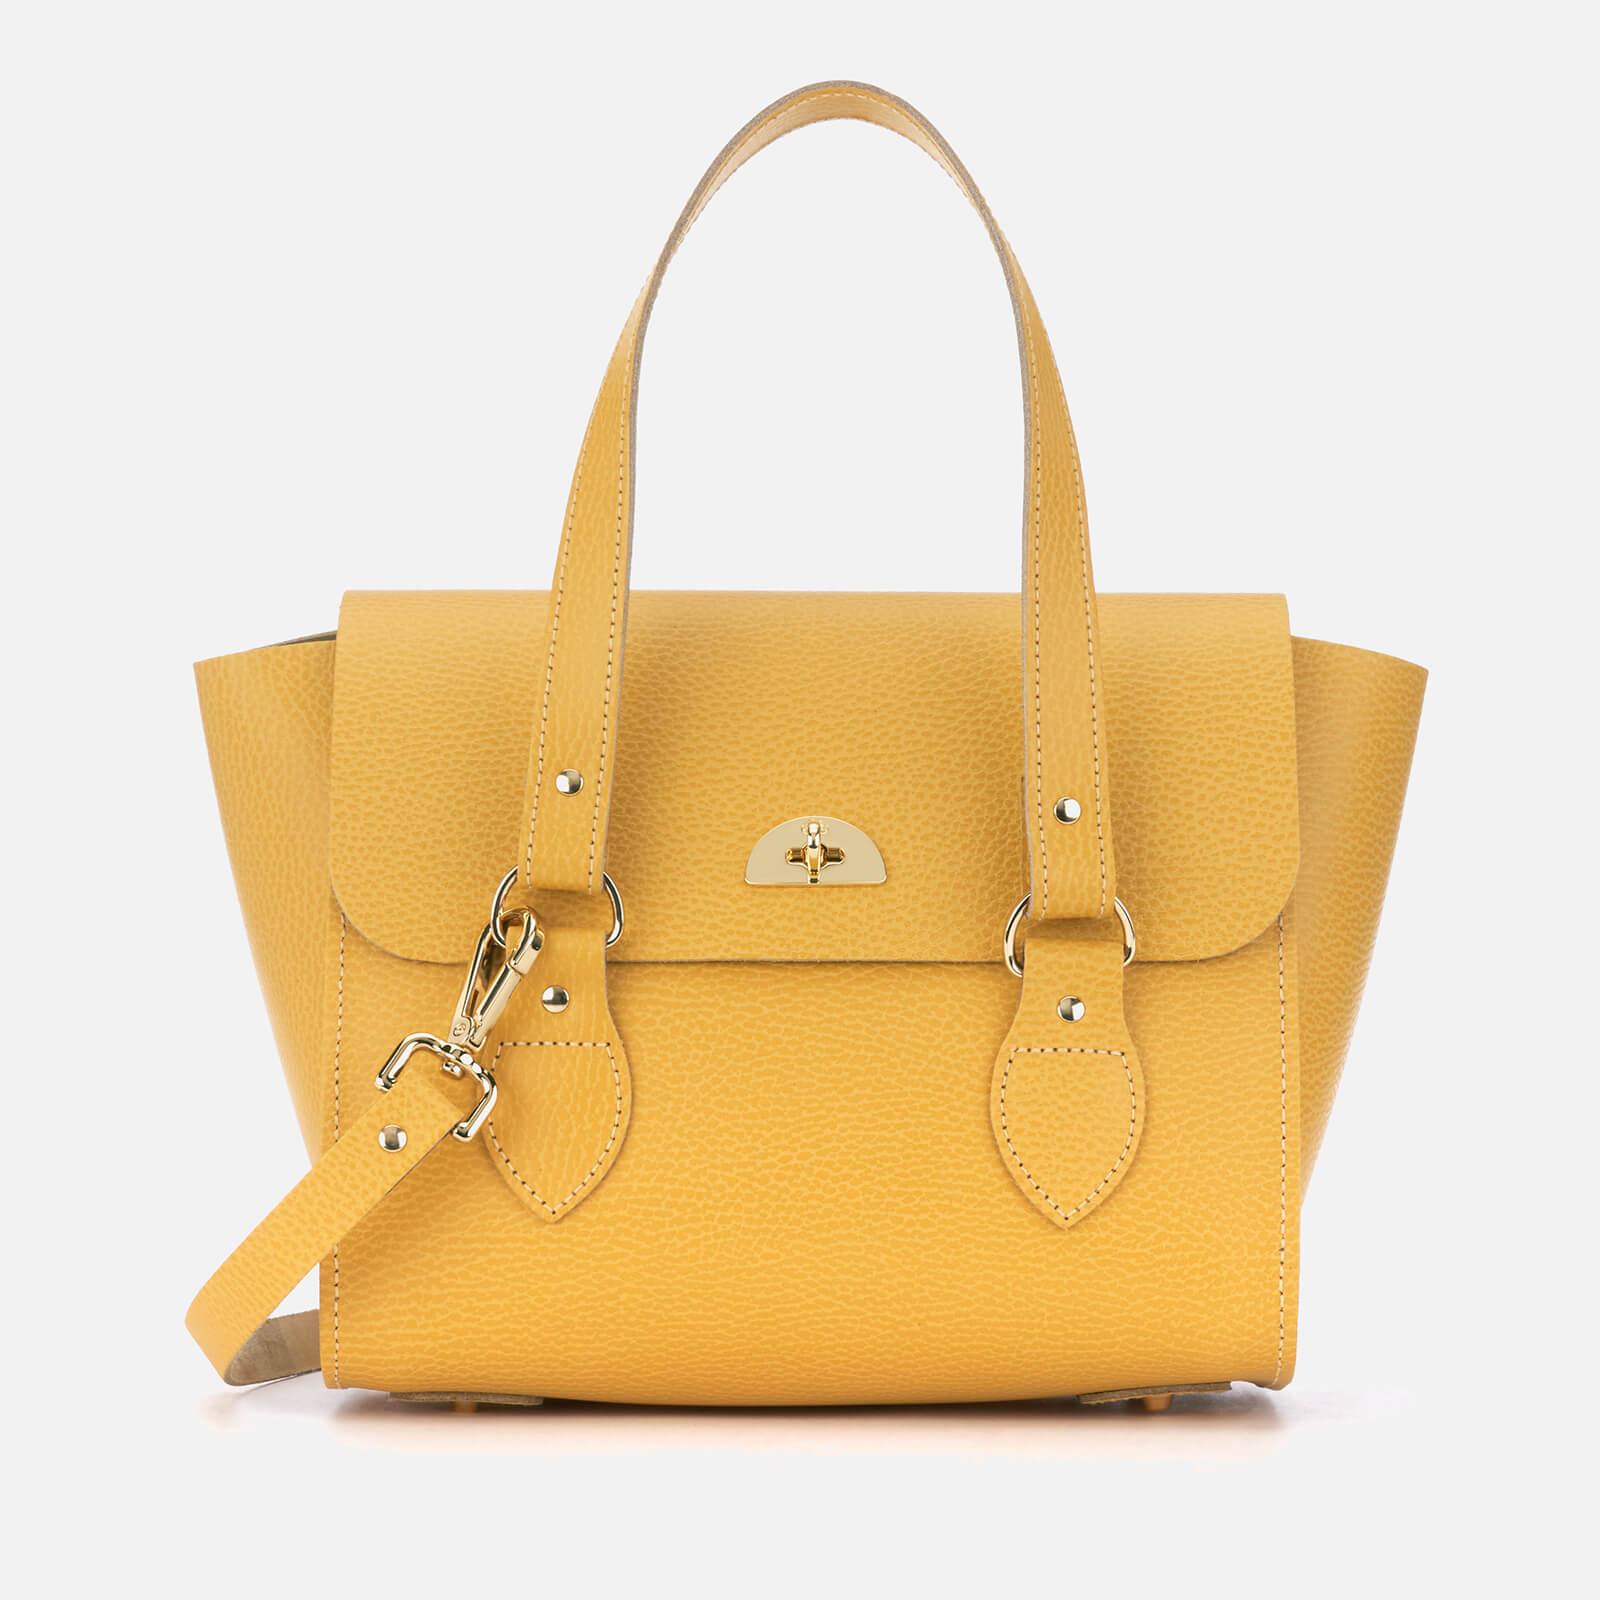 Cambridge Satchel Company Leather Small Emily Tote Bag in Yellow - Lyst